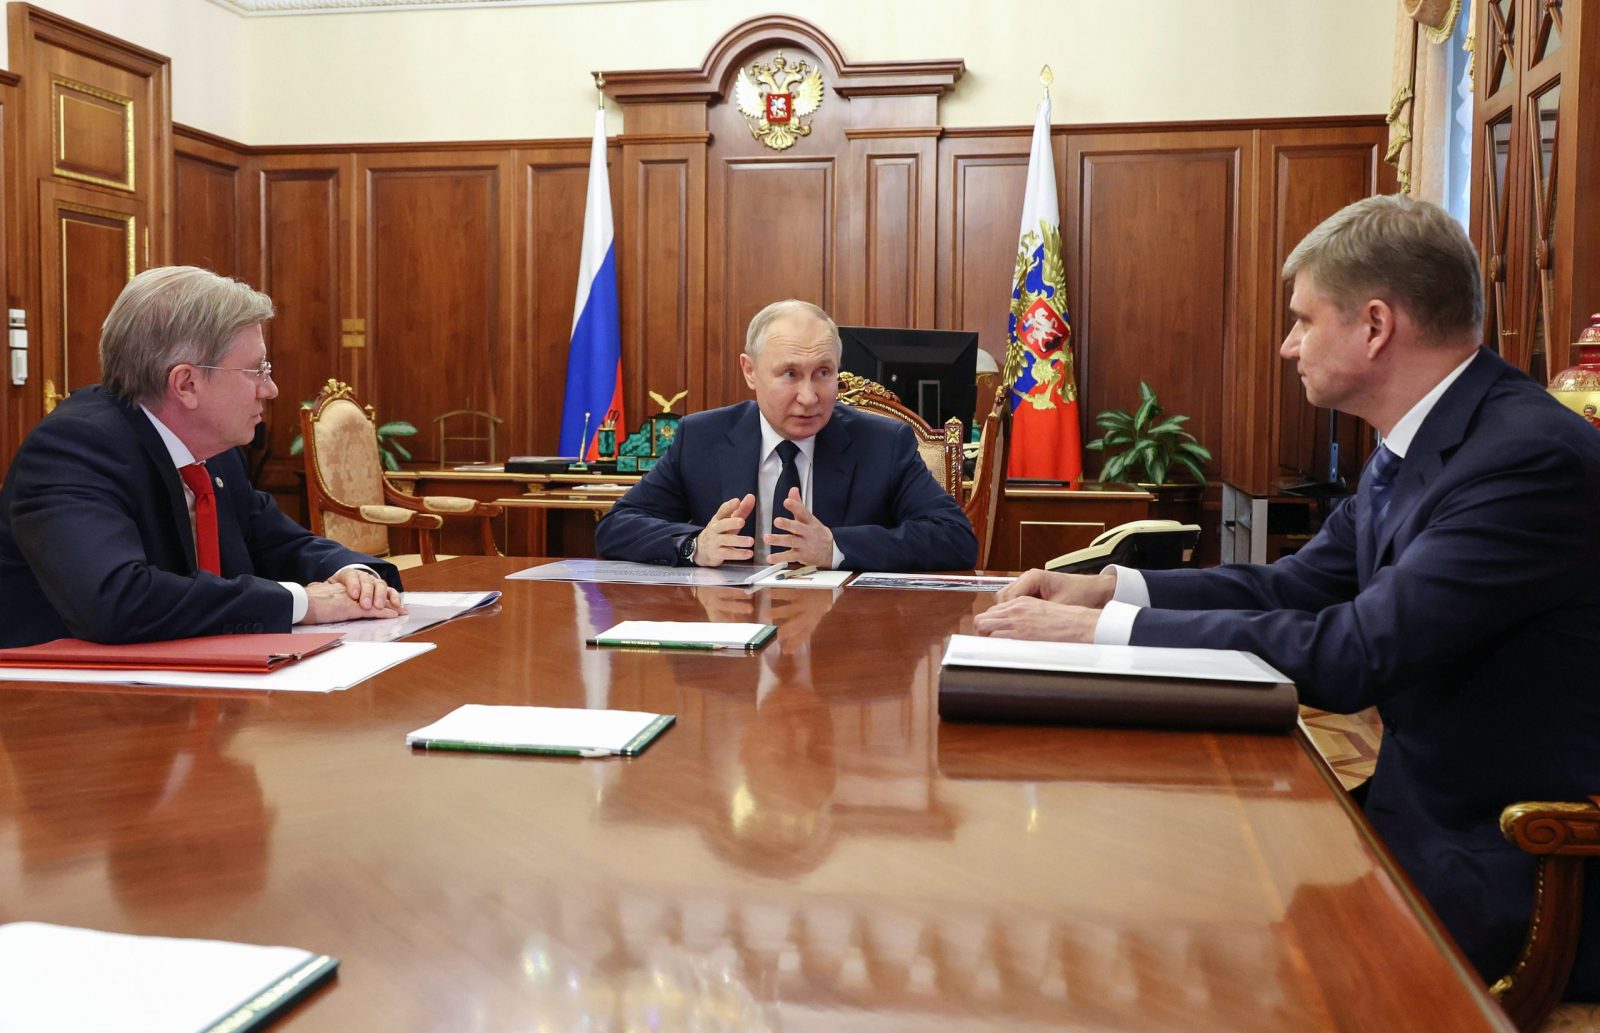 epa10674865 Russian President Vladimir Putin (C) meets with Transport Minister Vitaly Savelyev (L) and Russian Railways CEO Oleg Belozerov (R) at the Kremlin, in Moscow, Russia, 05 June 2023. The airport of Mariupol may start functioning in 2024-2025, the airports of Donetsk, Luhansk, Kherson and Zaporozhye will be activated a little later due to the destruction, the head of the Ministry of Transport Vitaly Savelyev said at a meeting with Russian President Vladimir Putin.  EPA/MIKHAEL KLIMENTYEV/SPUTNIK/KREMLIN POOL MANDATORY CREDIT